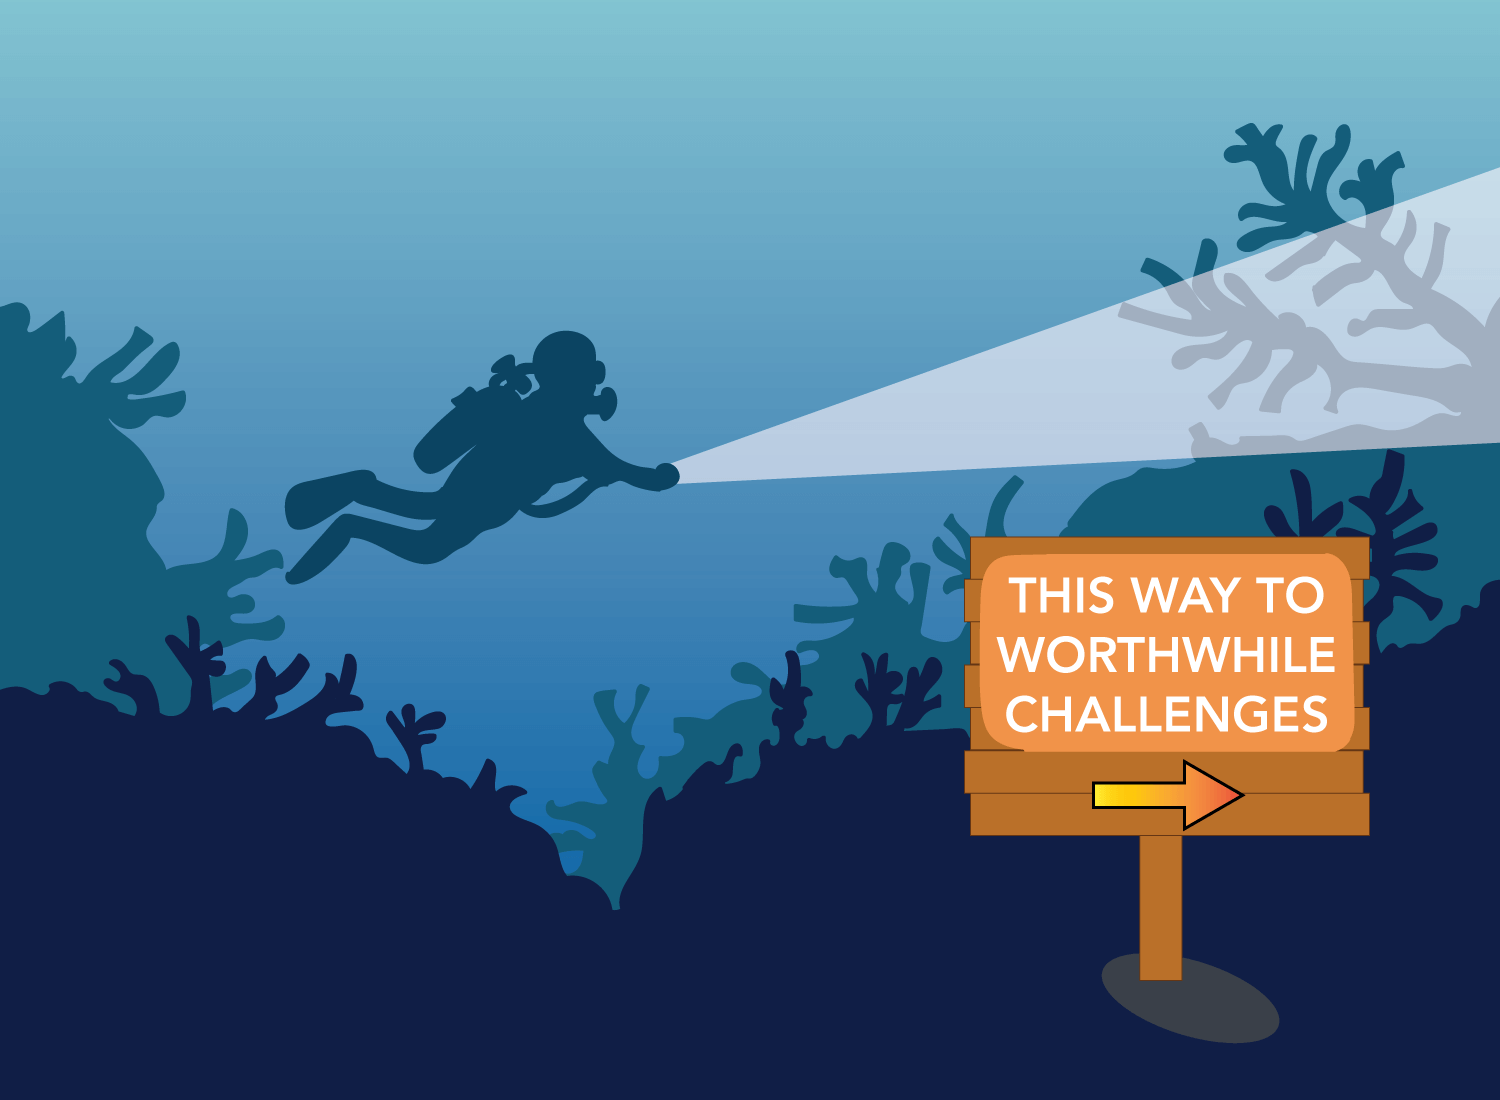 diving deep into challenges and problems